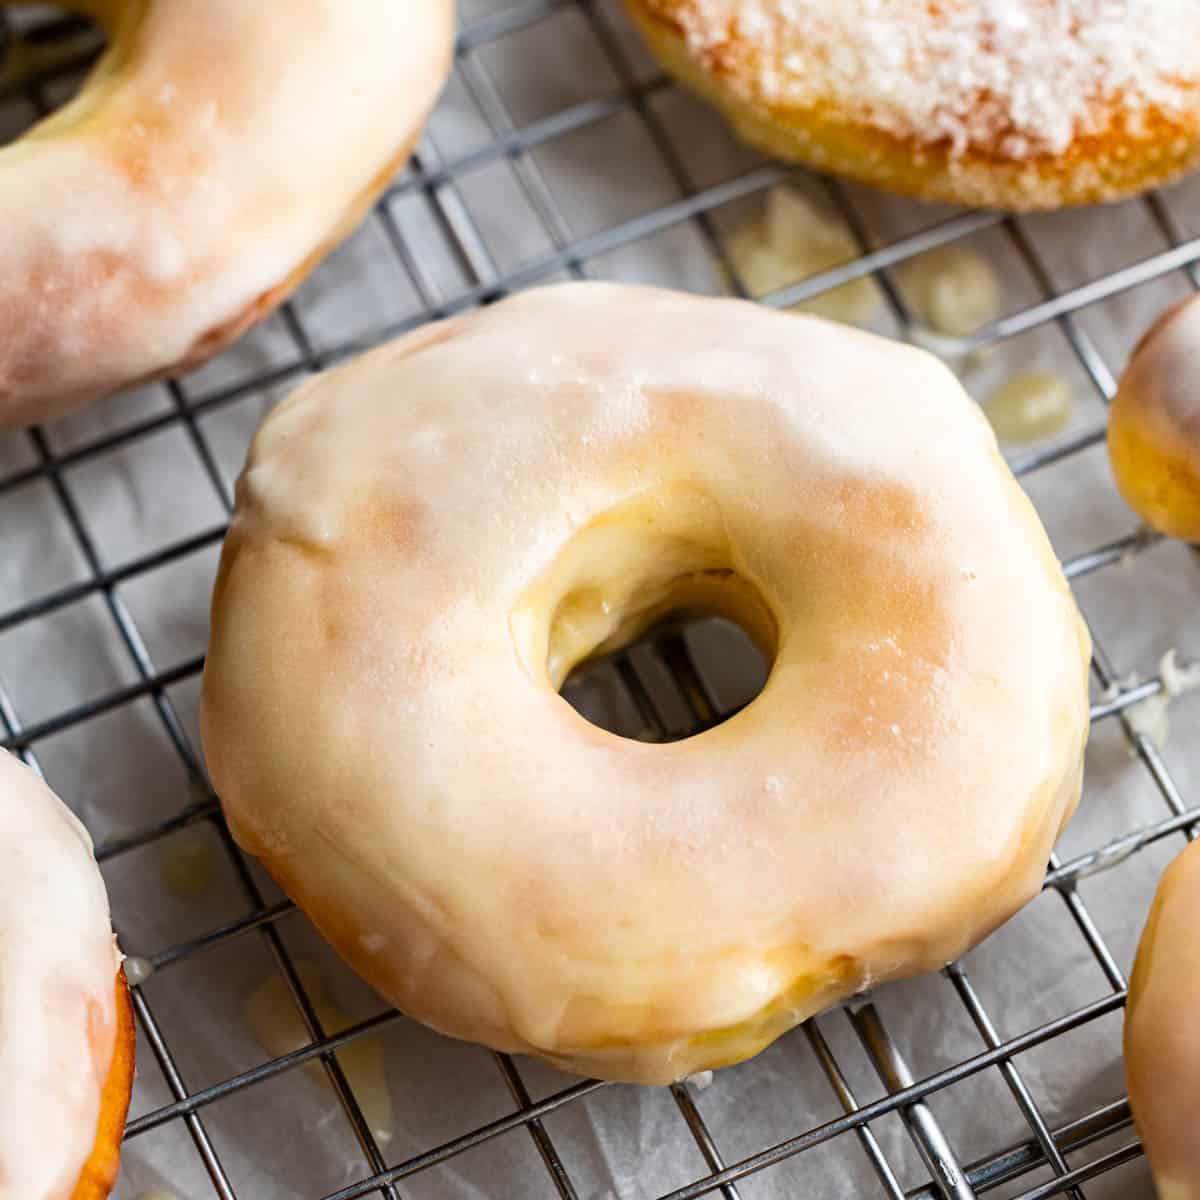 Overhead view of a glazed donut on a cooling rack.